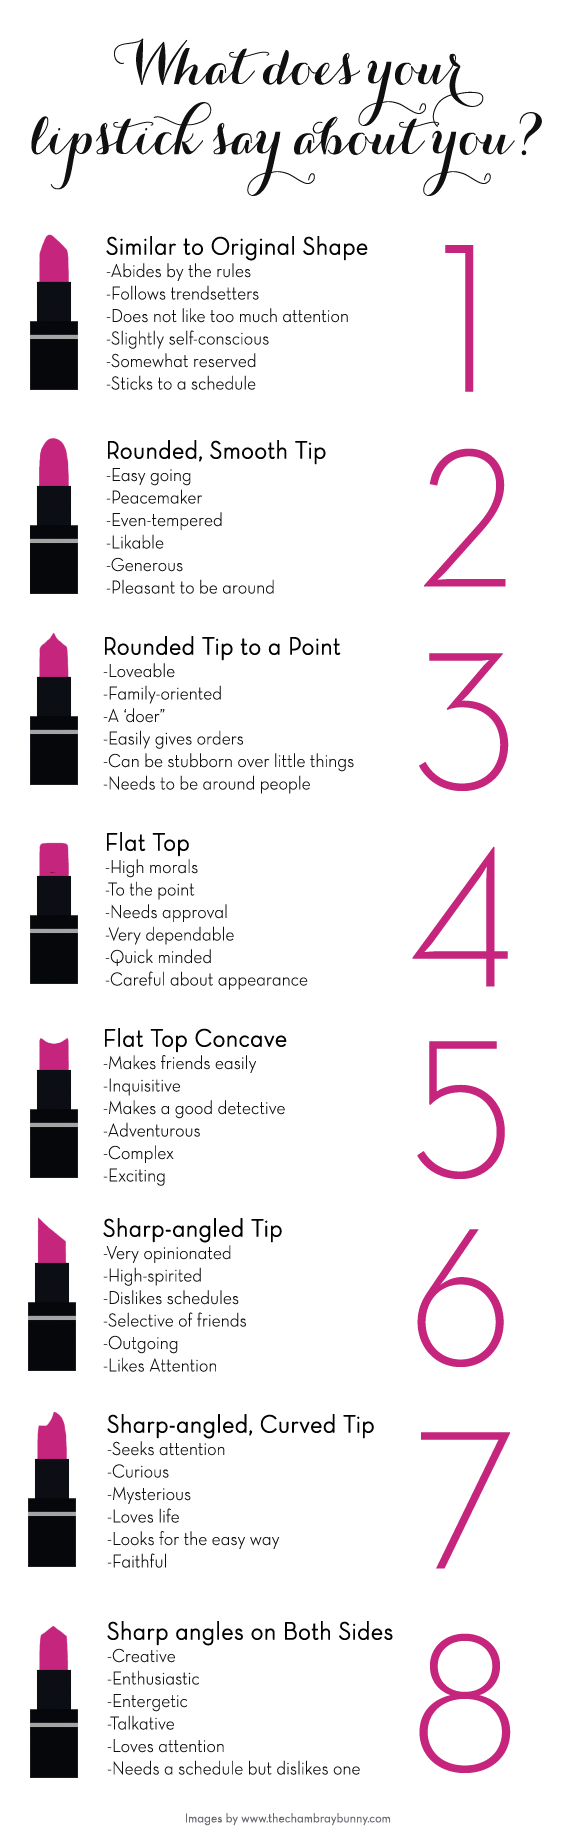 What does your lipstick say about you?